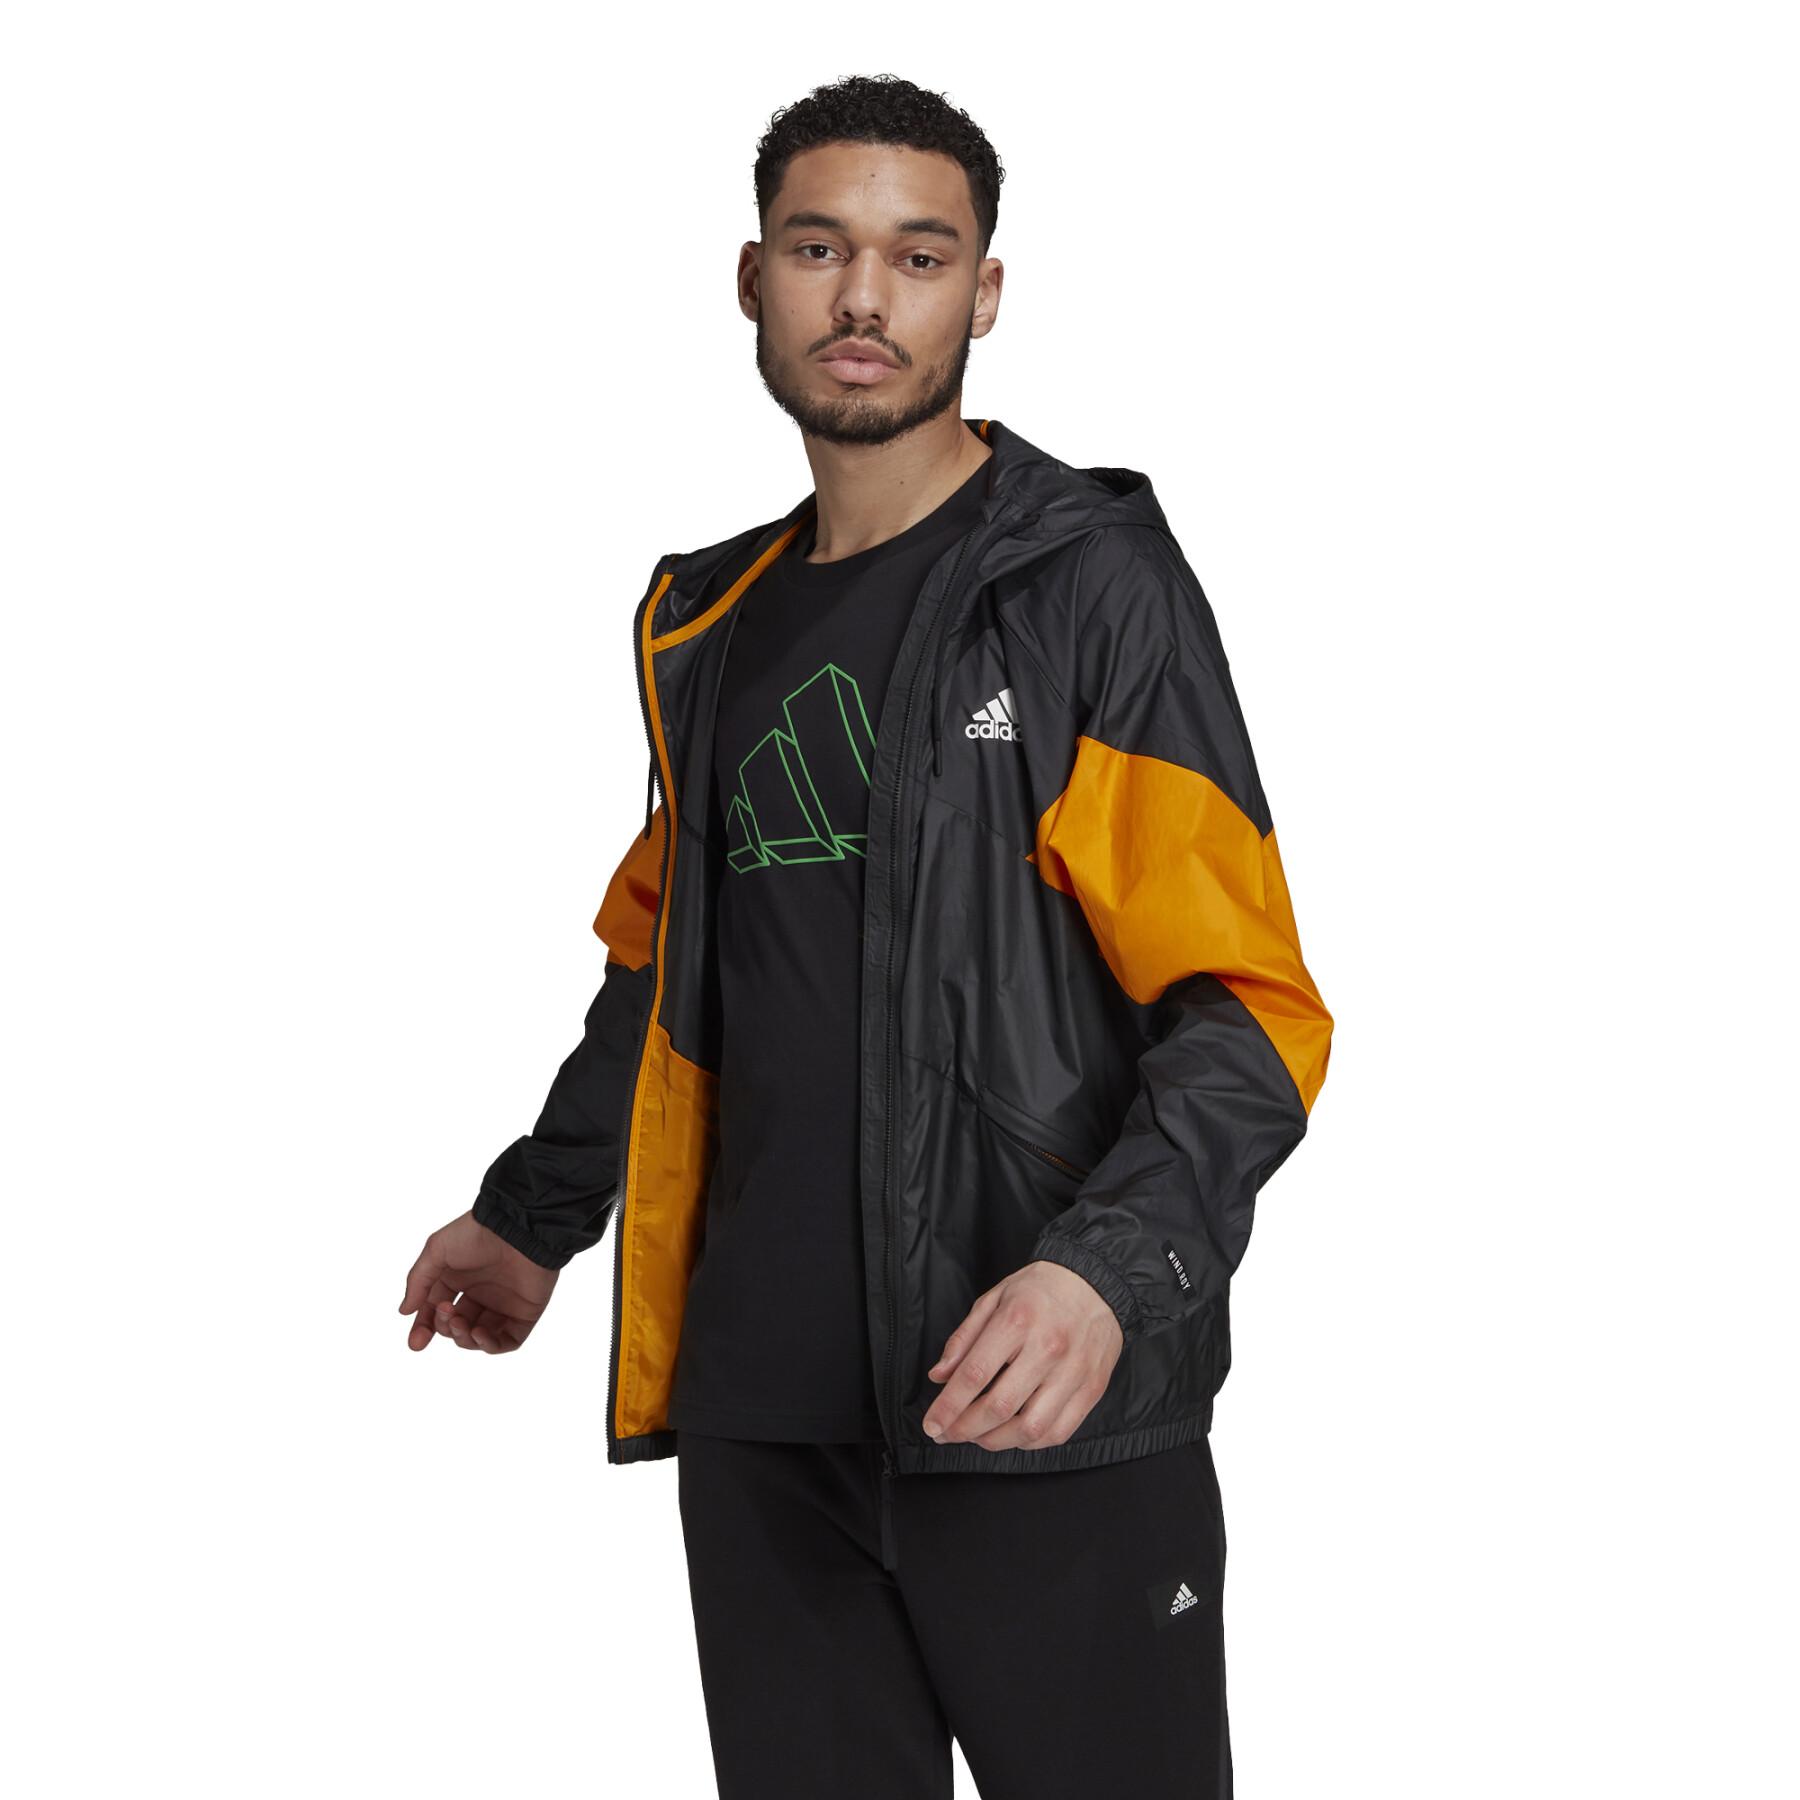 Veste coupe-vent adidas Back to Sport